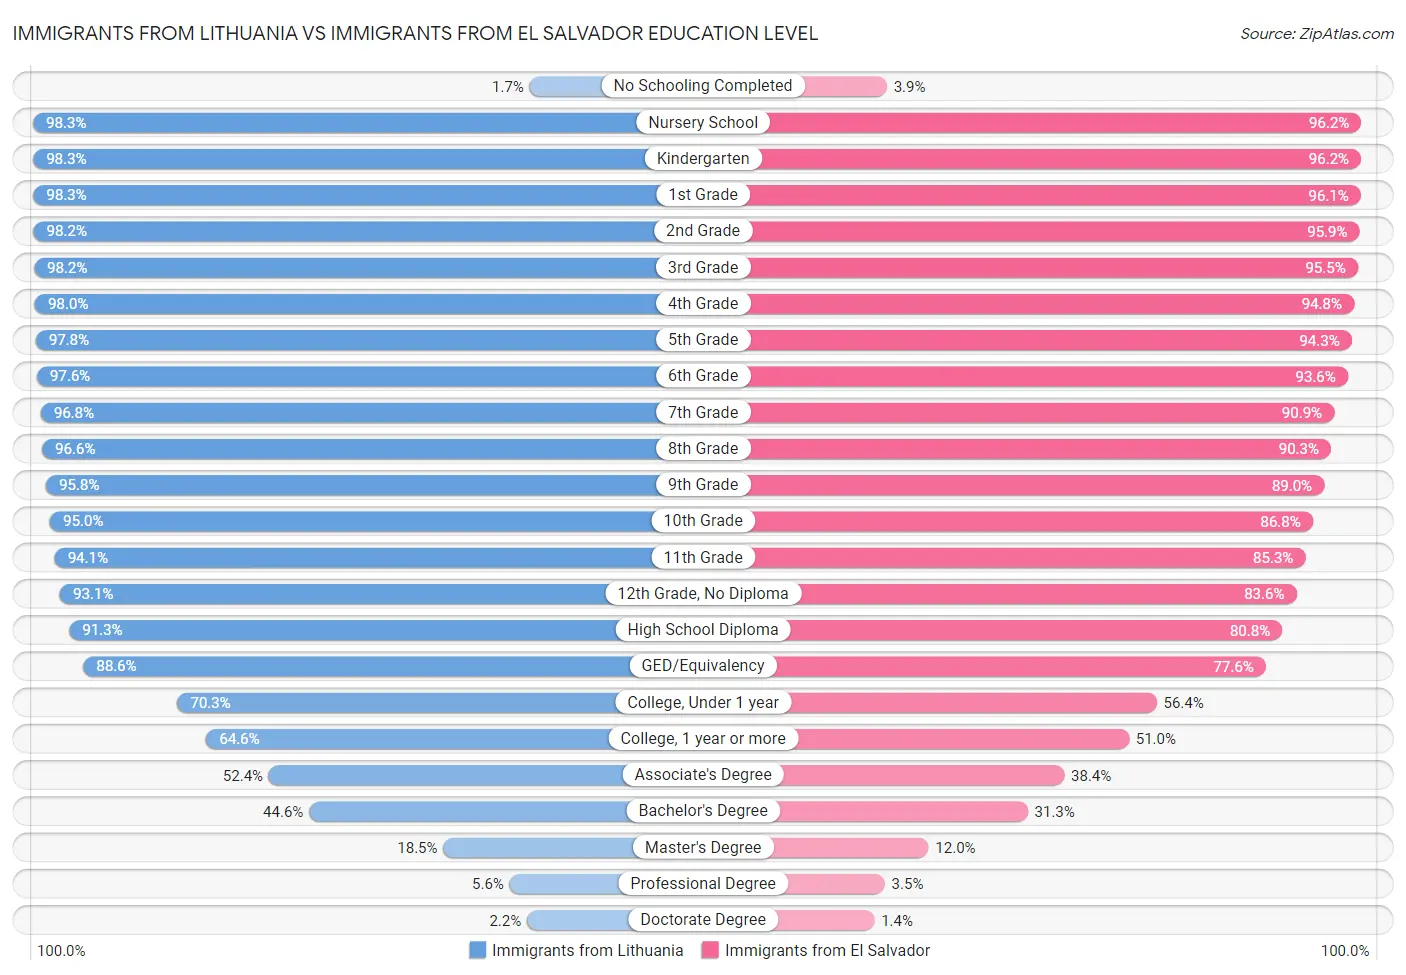 Immigrants from Lithuania vs Immigrants from El Salvador Education Level